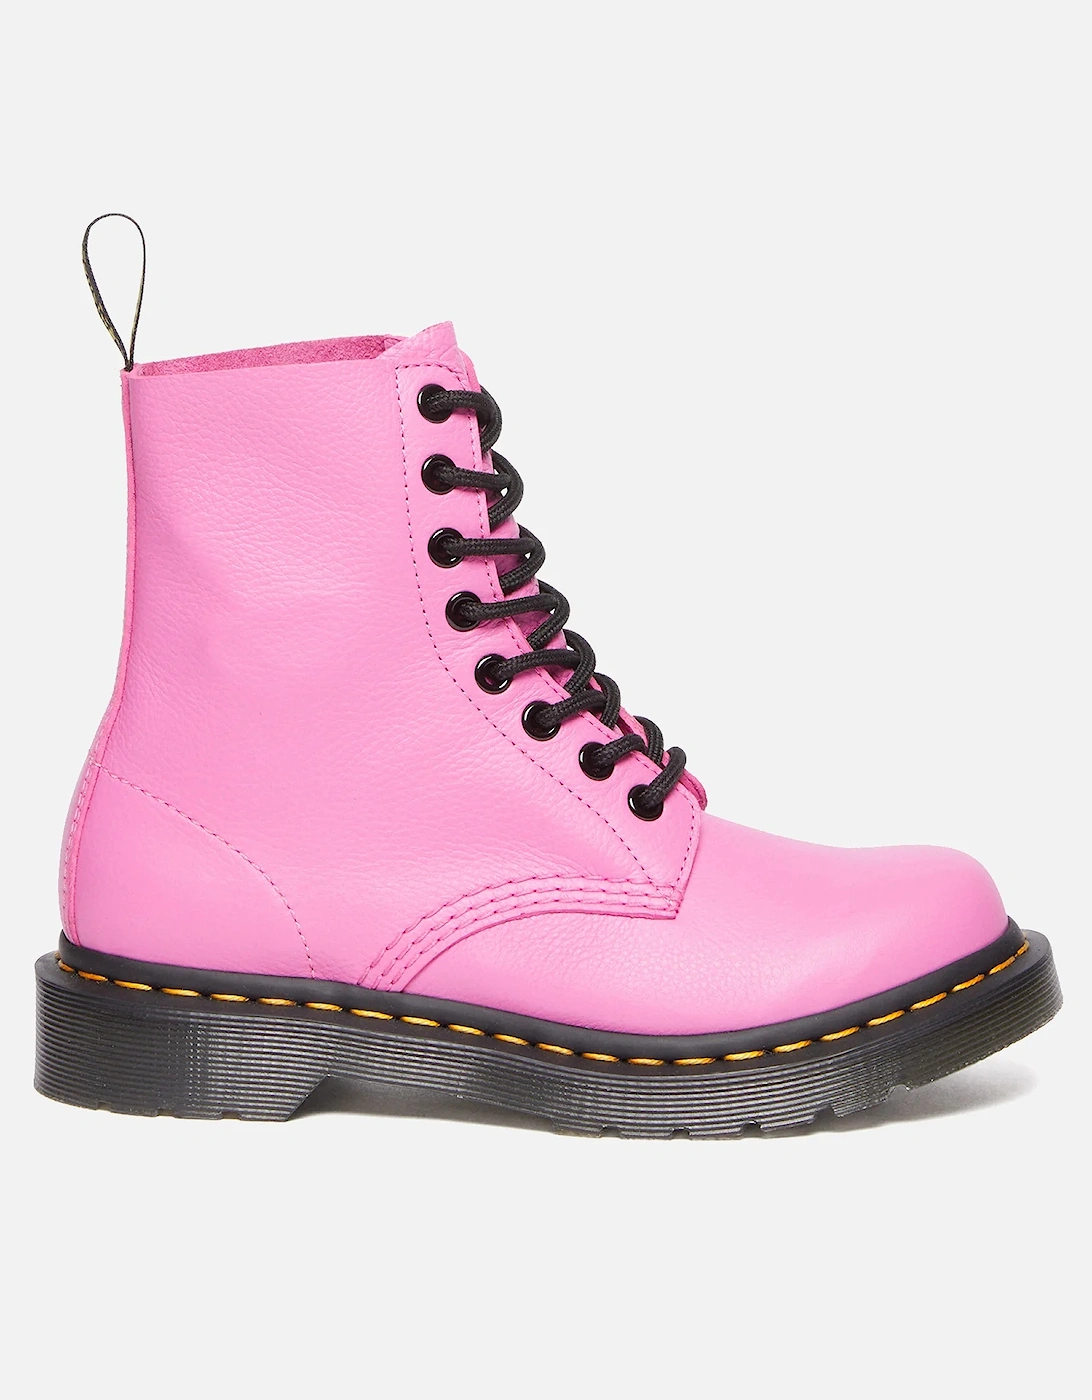 Dr. Martens Women's 1460 Pascal Virginia Leather 8-Eye Boots - Dr. Martens - Home - Women's Shoes - Women's Boots - Dr. Martens Women's 1460 Pascal Virginia Leather 8-Eye Boots, 2 of 1